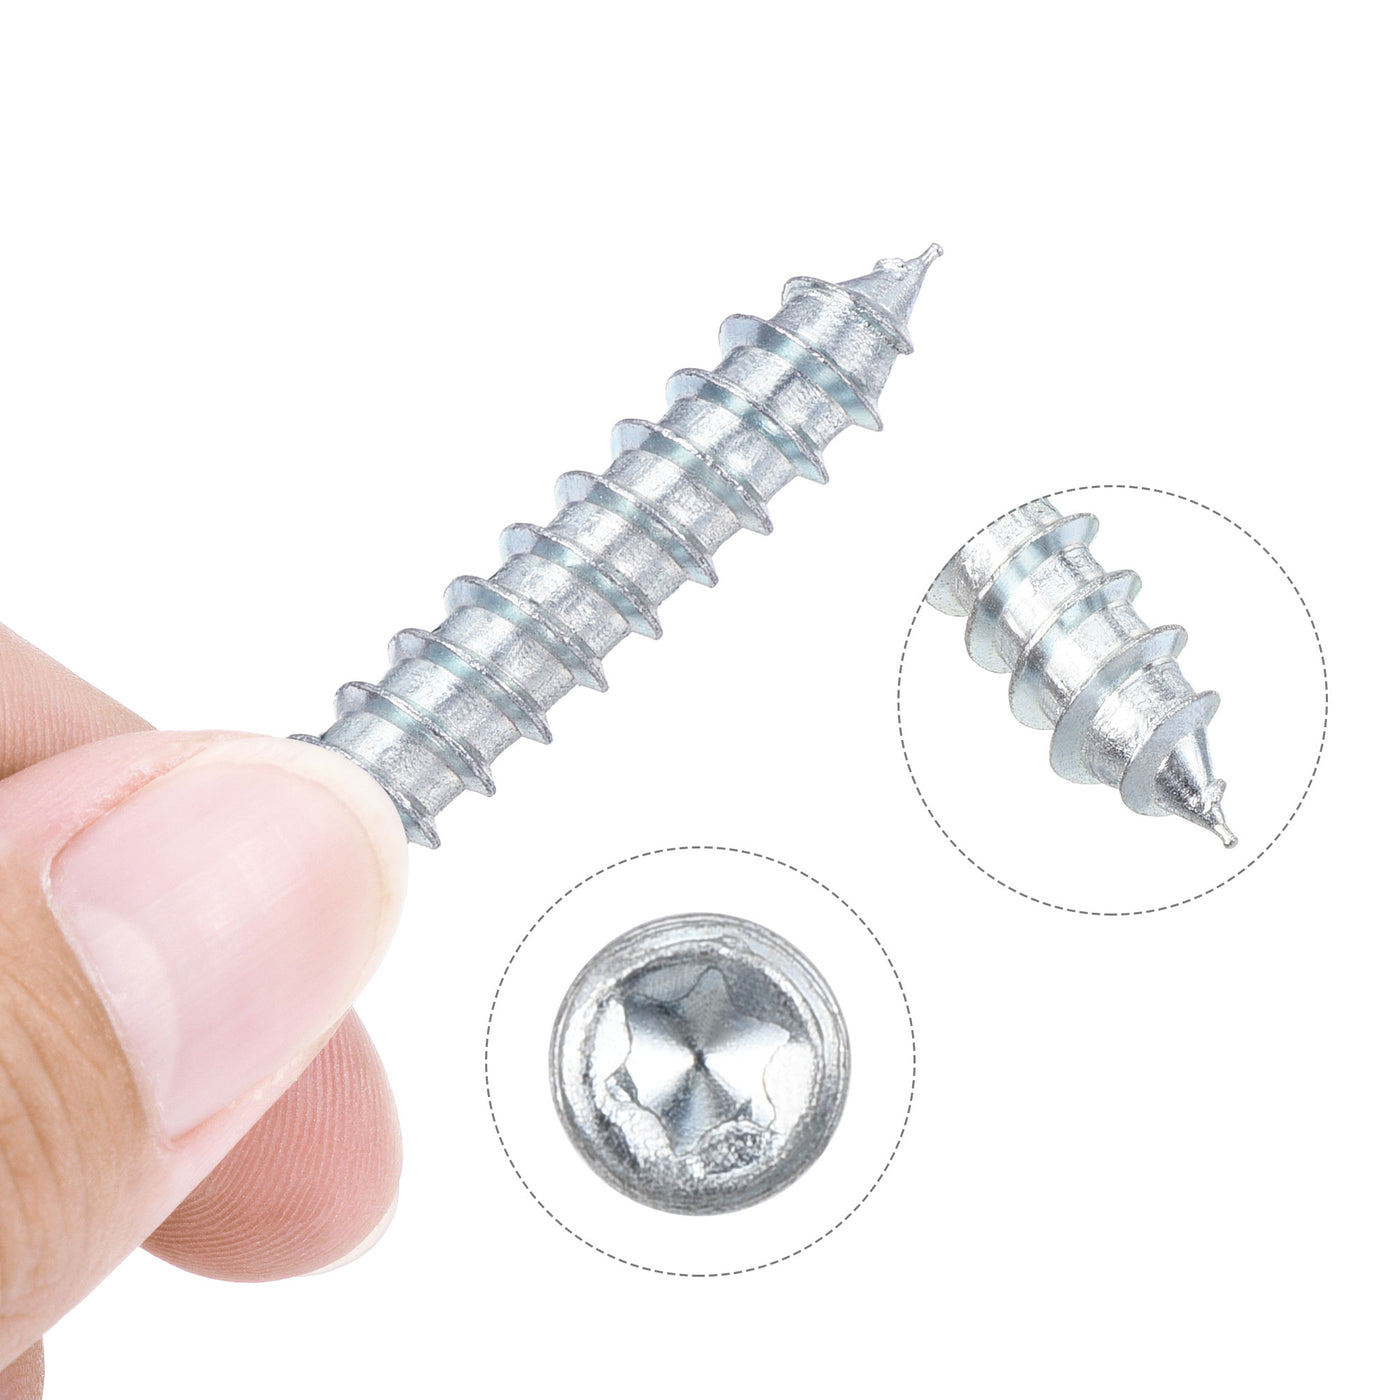 Uxcell Uxcell M10x39mm Hanger Bolts Double Head Dowel Screw for Wood Furniture 10pcs